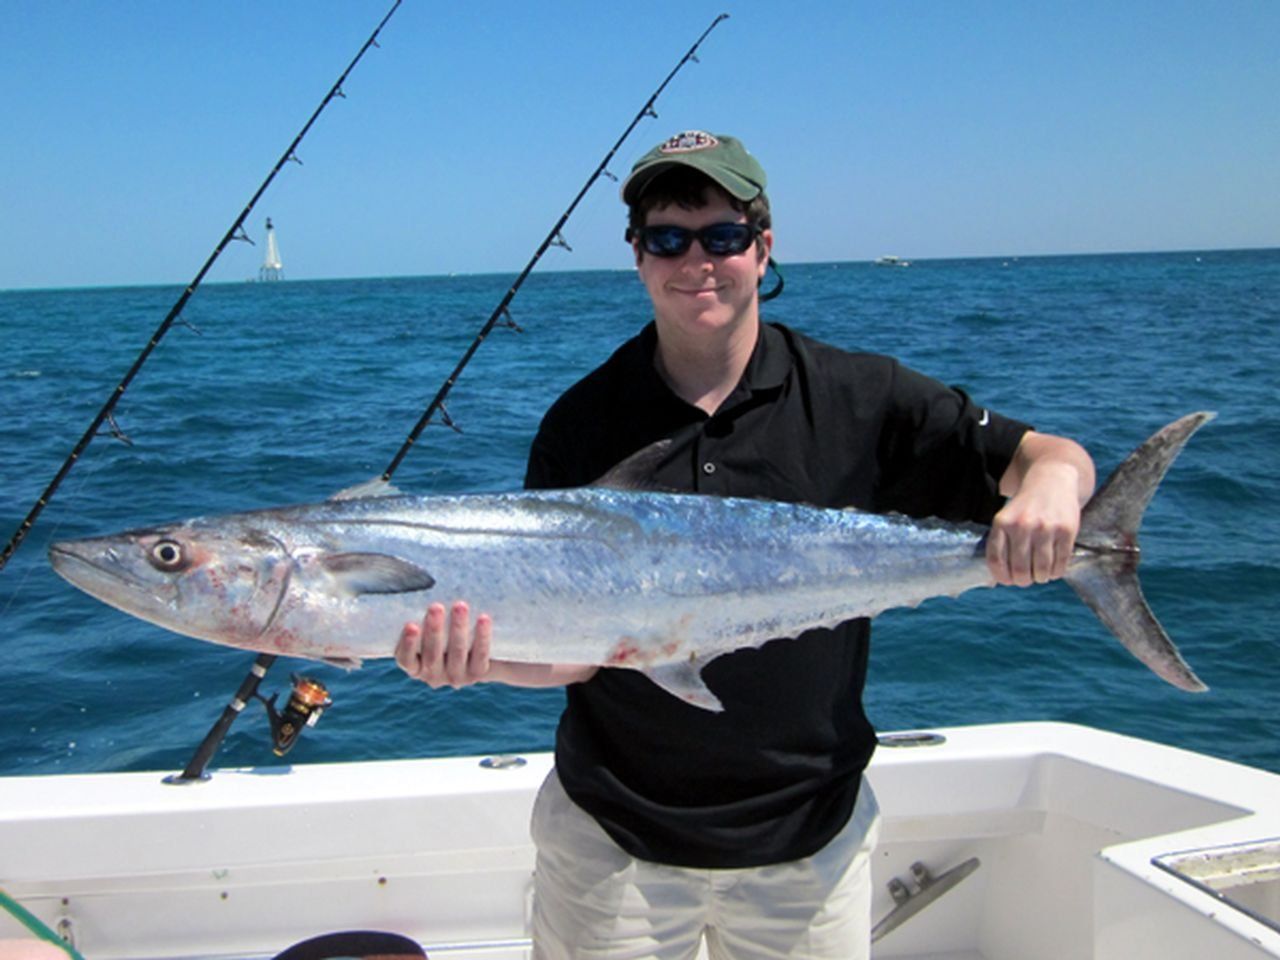 A participant displays a king mackerel caught during the months-long Key West Fishing Tournament.